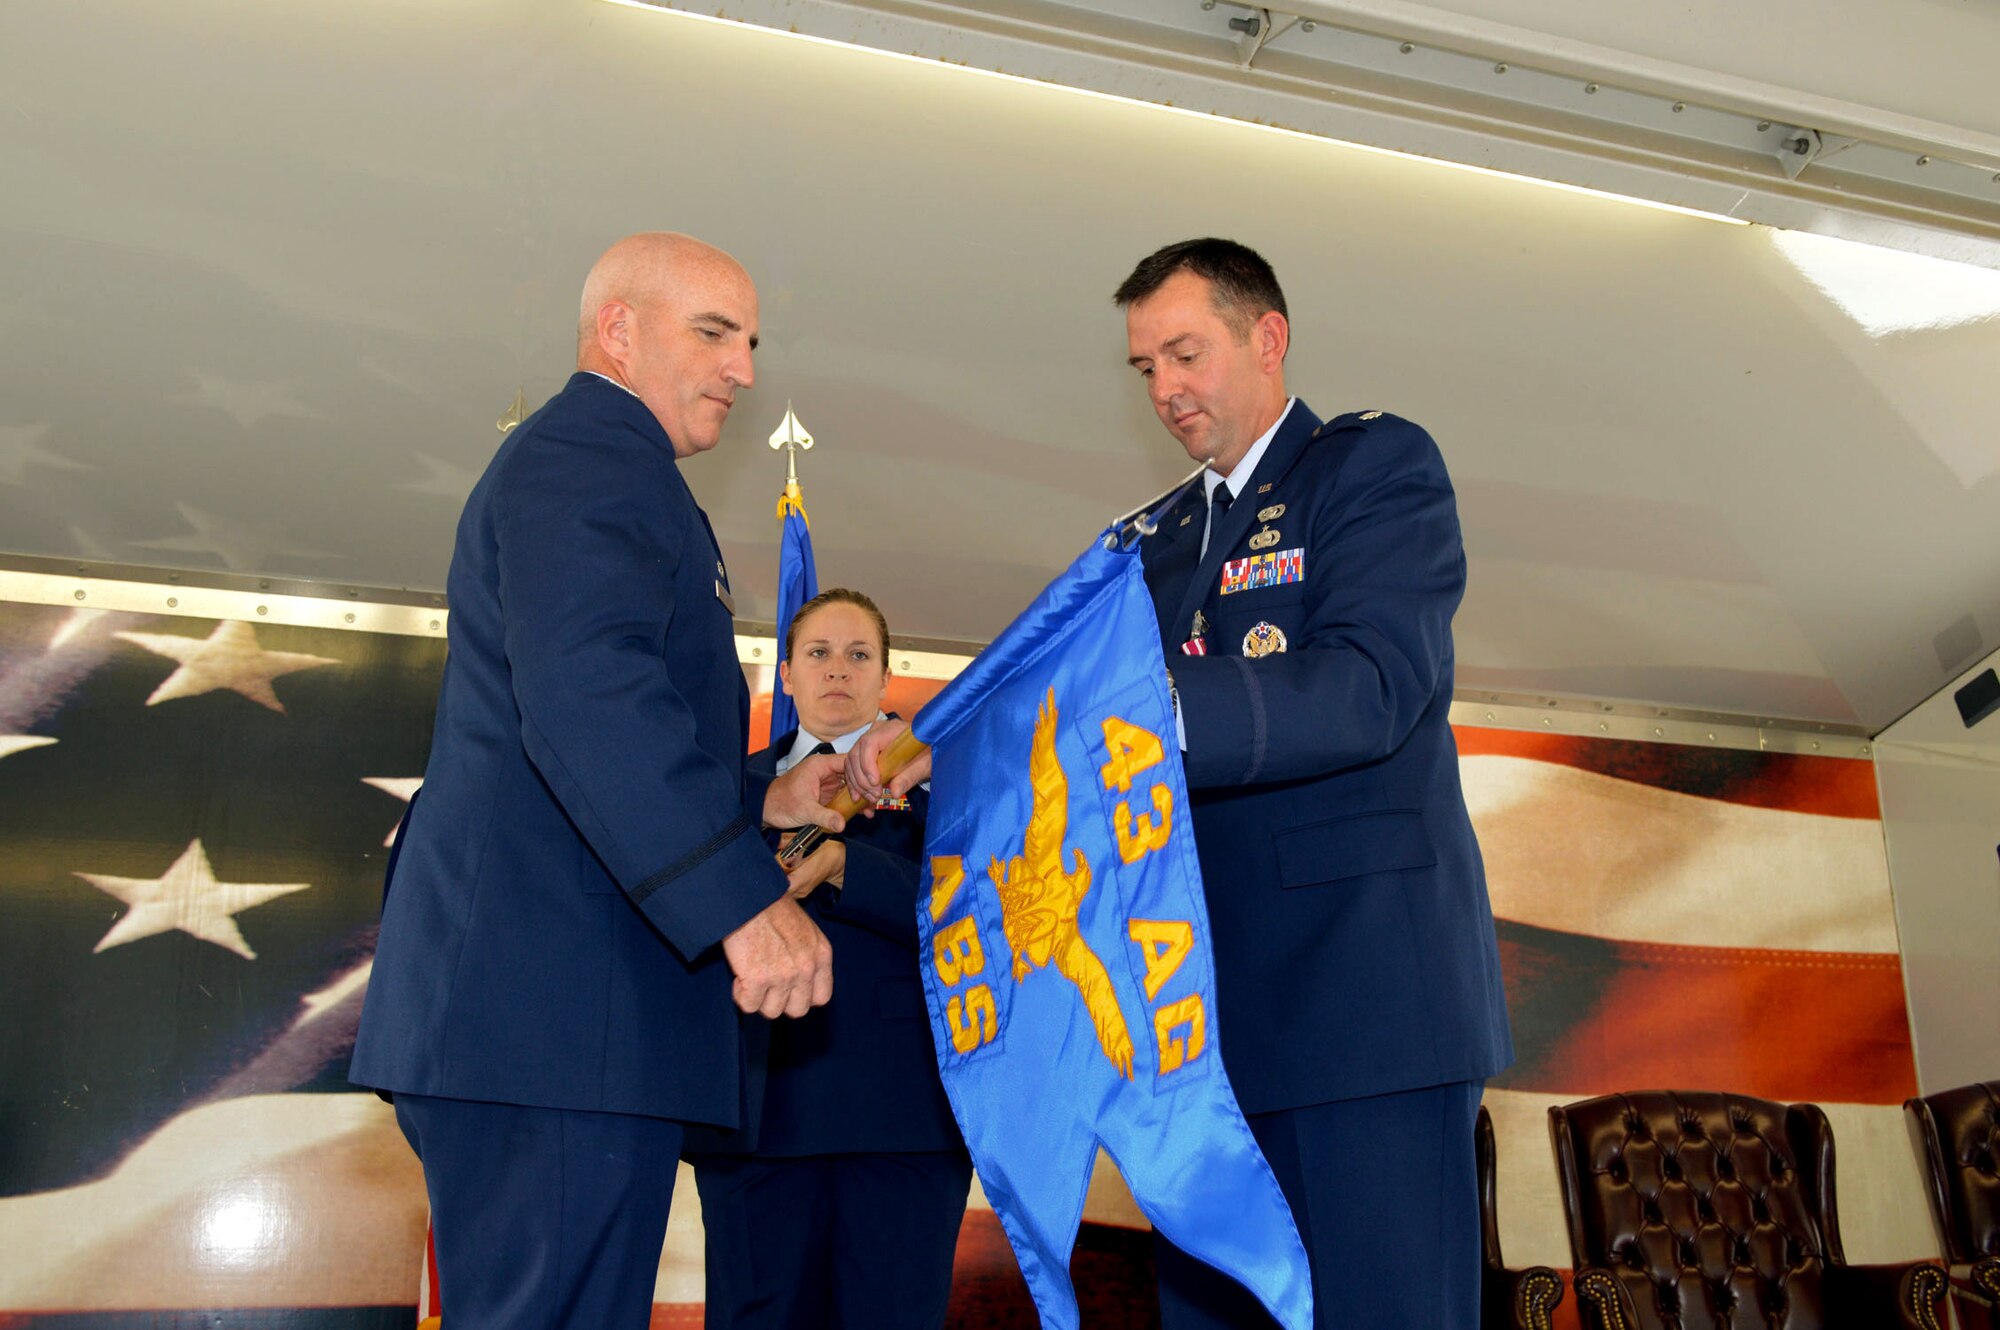 Lt. Col. Brian Ballew, 43rd Force Support Squadron commander, right, and Col. Kenneth Moss, 43rd Airlift Group commander, unfurl the 43rd Air Base Squadron guidon July 1, 2015, during the 43rd ABS redesignation and change of command ceremony at Pope Army Airfield, North Carolina. Force support and logistics Airmen and functions transferred to the newly established 43rd ABS from the inactivated 43rd Logistics Readiness Squadron and the 43rd FSS. (U.S. Air Force photo/Marvin Krause)